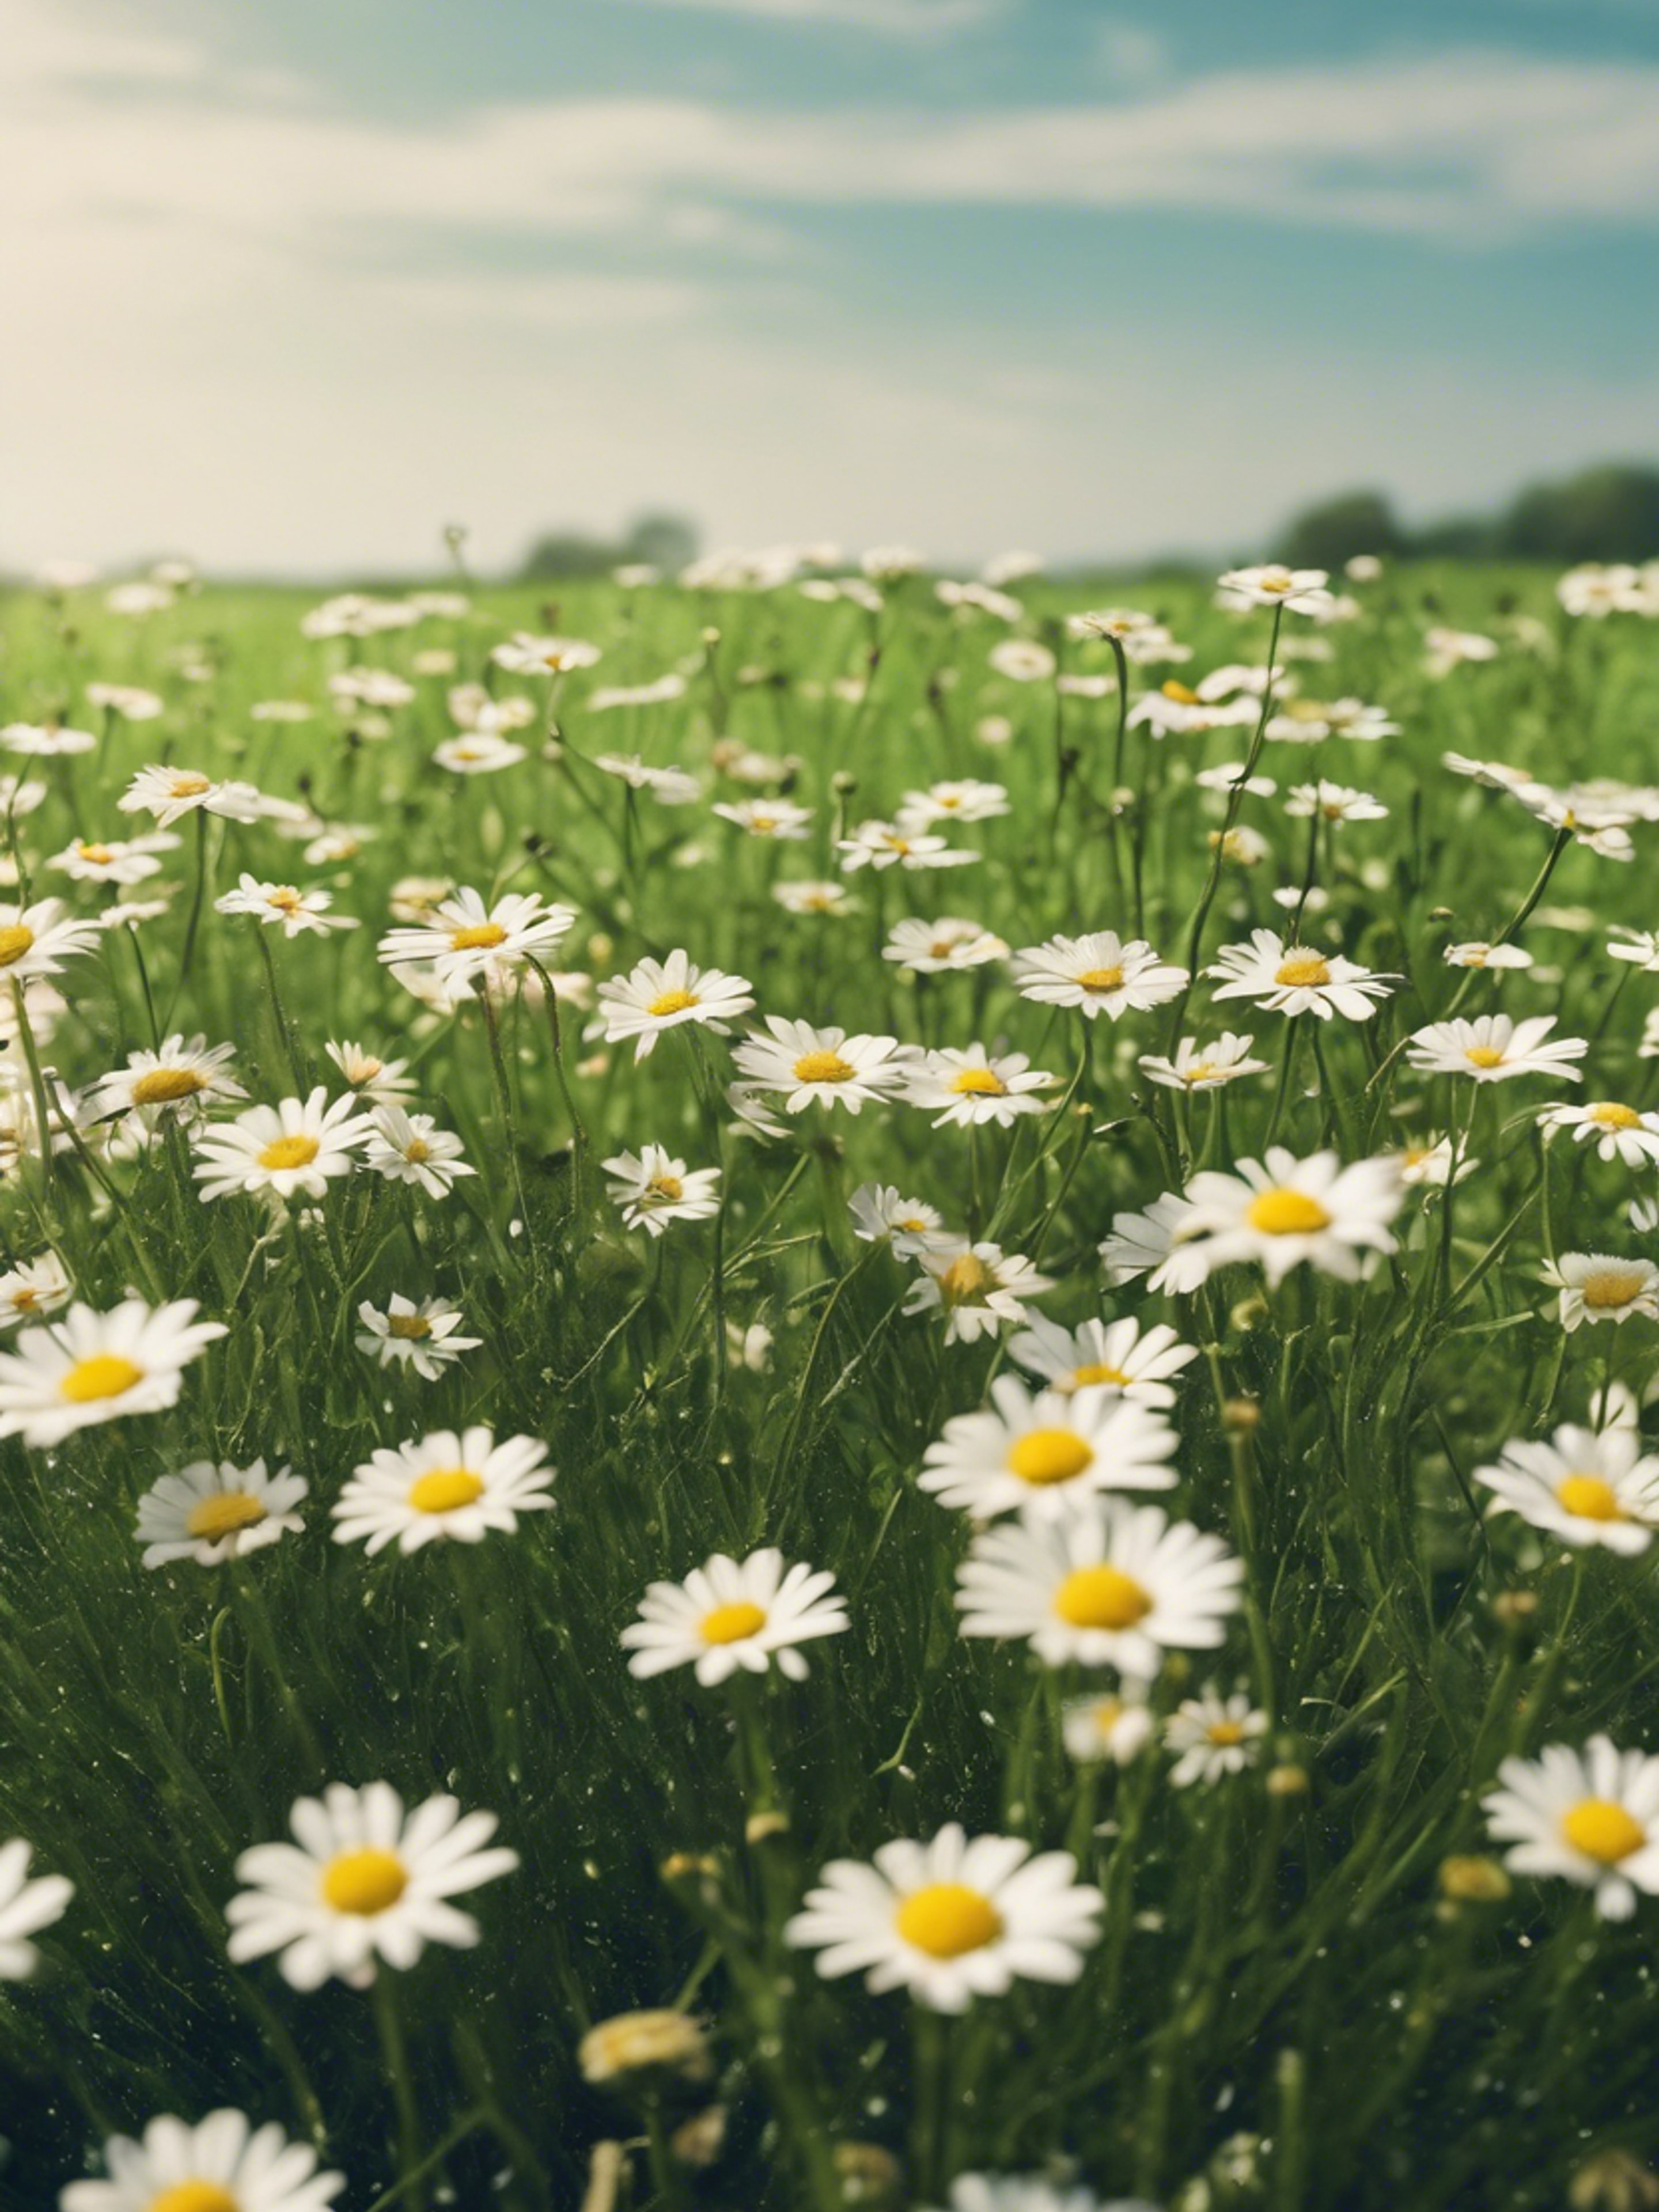 A cool green field sprinkled with daisies under a morning sky. Обои[e270184600e04e908453]